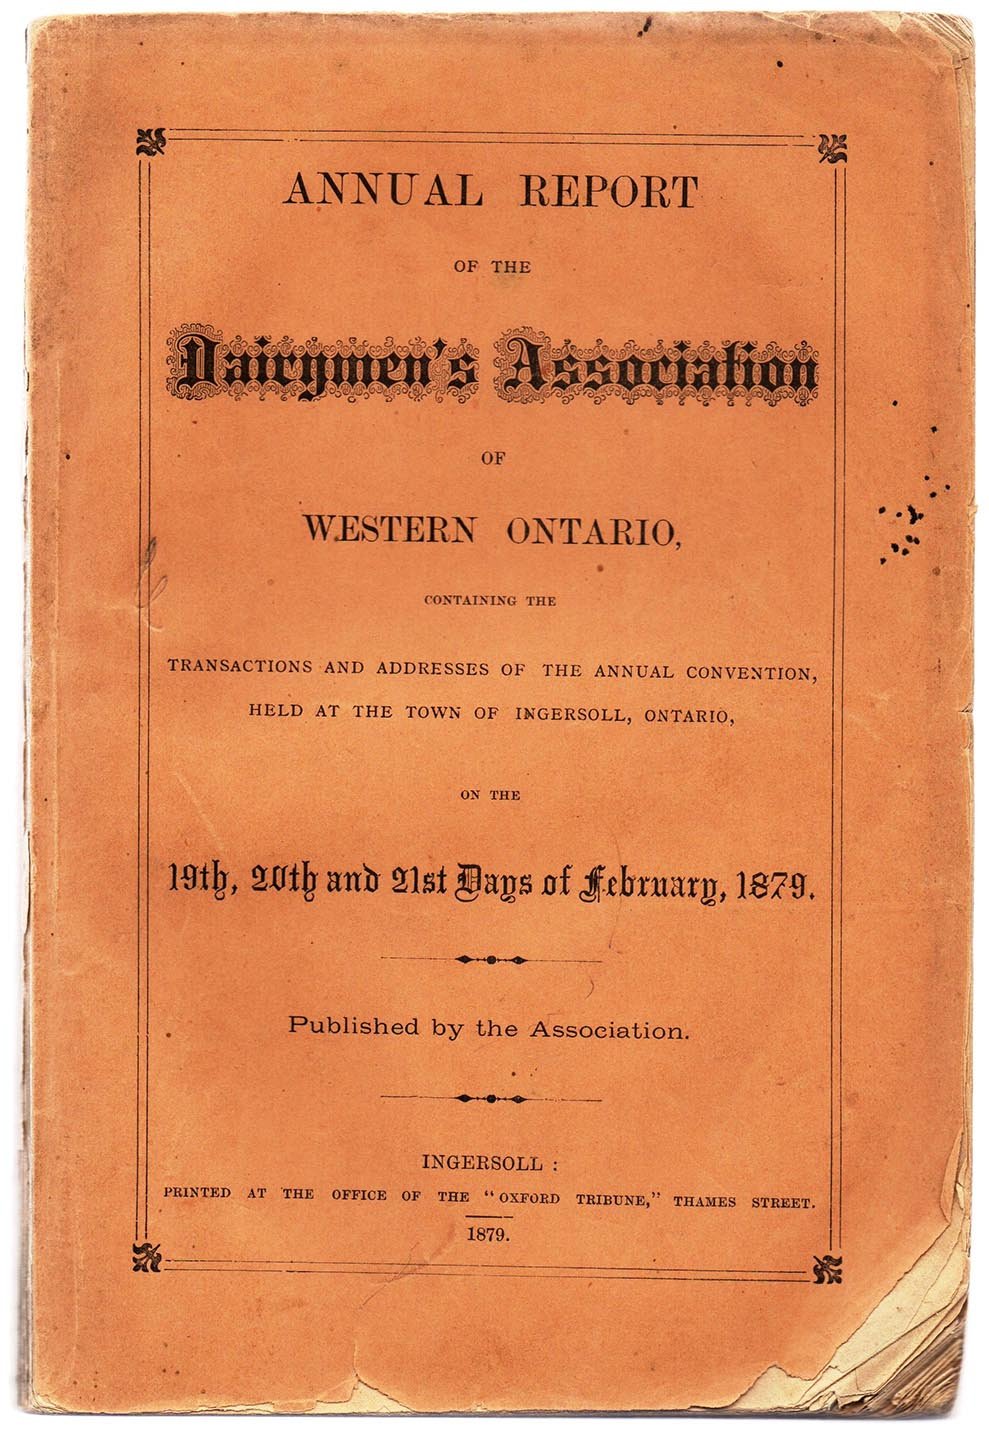 Annual Report of the Dairymen's Association of Western Ontario, Containing the Transactions and Addresses of the Annual Convention, Held at the Town of Ingersoll, Ontario, on the 19th, 20th and 21st Days of February, 1879